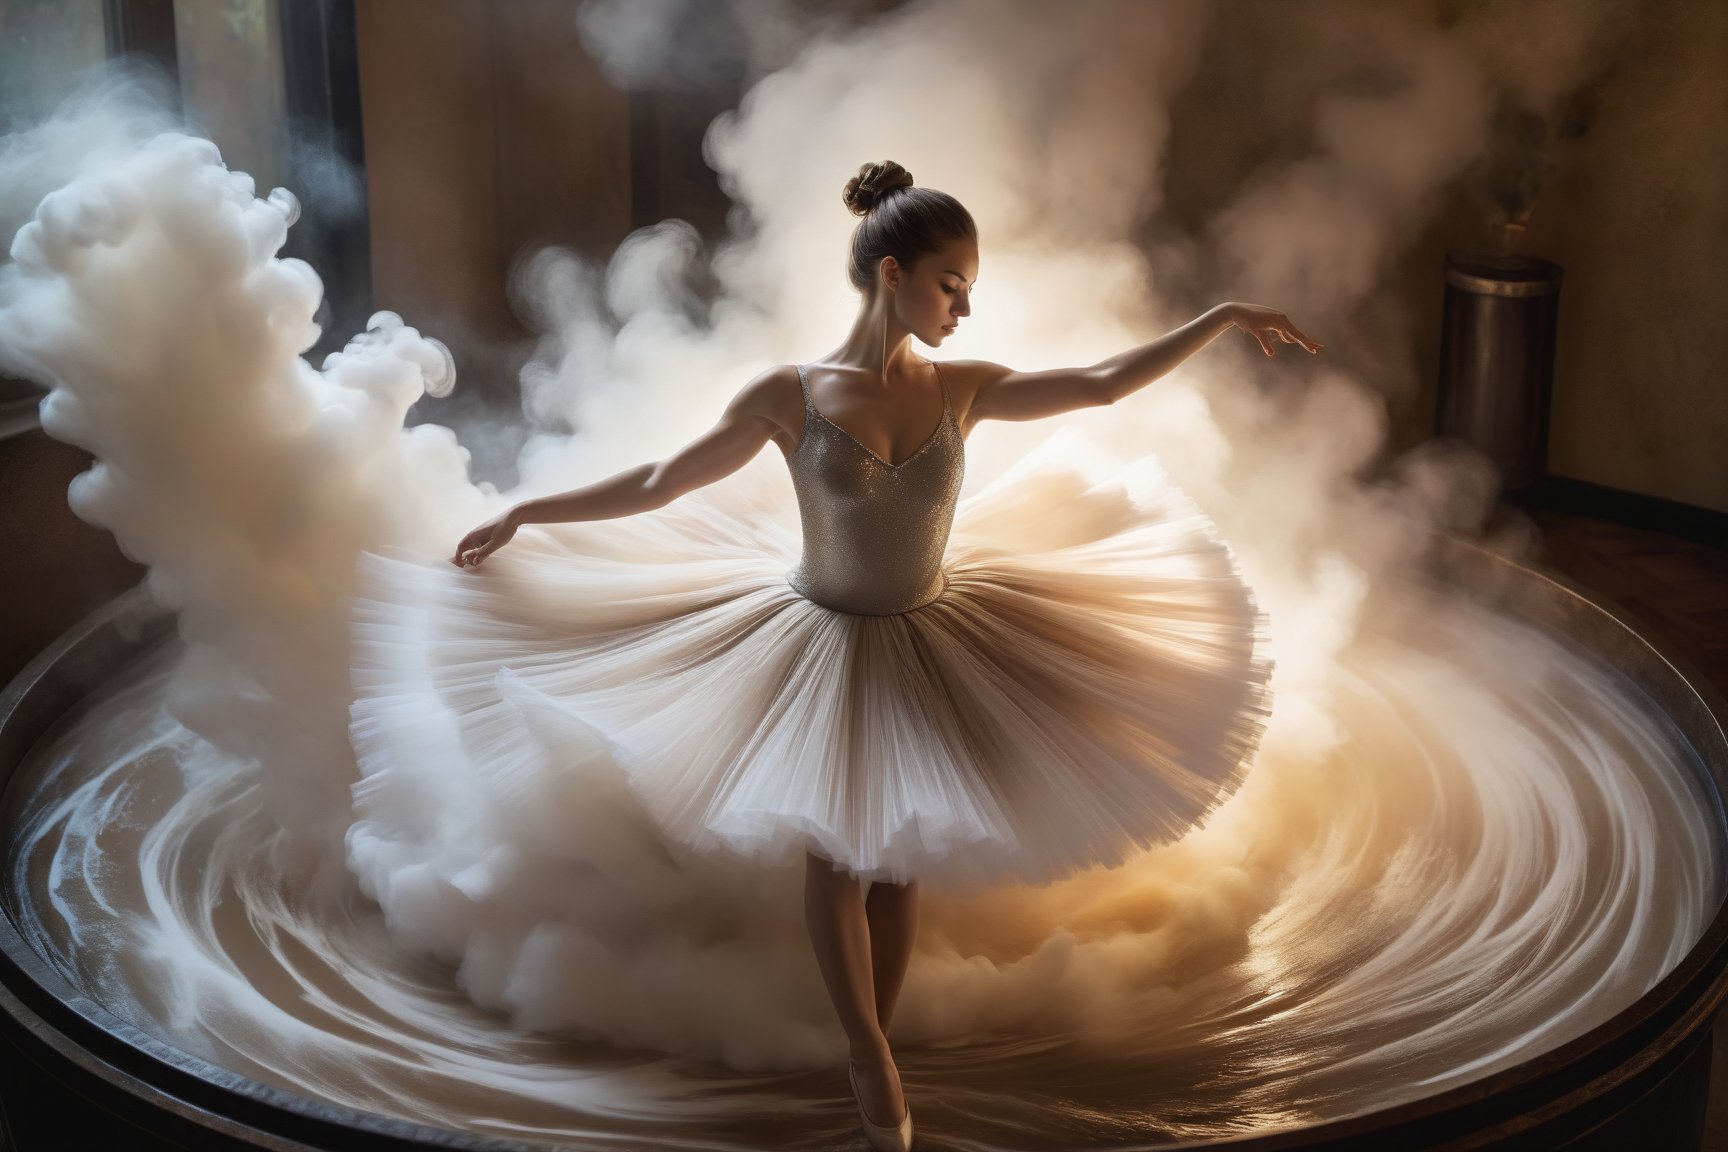 In a dimly lit, smoky room, a delicate ballerina emerges from a whirlpool of creamy coffee foam, her tutu-like skirt wisping outwards as she rises. Artistic brushstrokes adorn the interior of a nearby coffee cup, its rim tracing a circular border around the scene. From above, the viewer gazes upon this whimsical tableau, surrounded by a haze of smoke and scattered coffee beans.